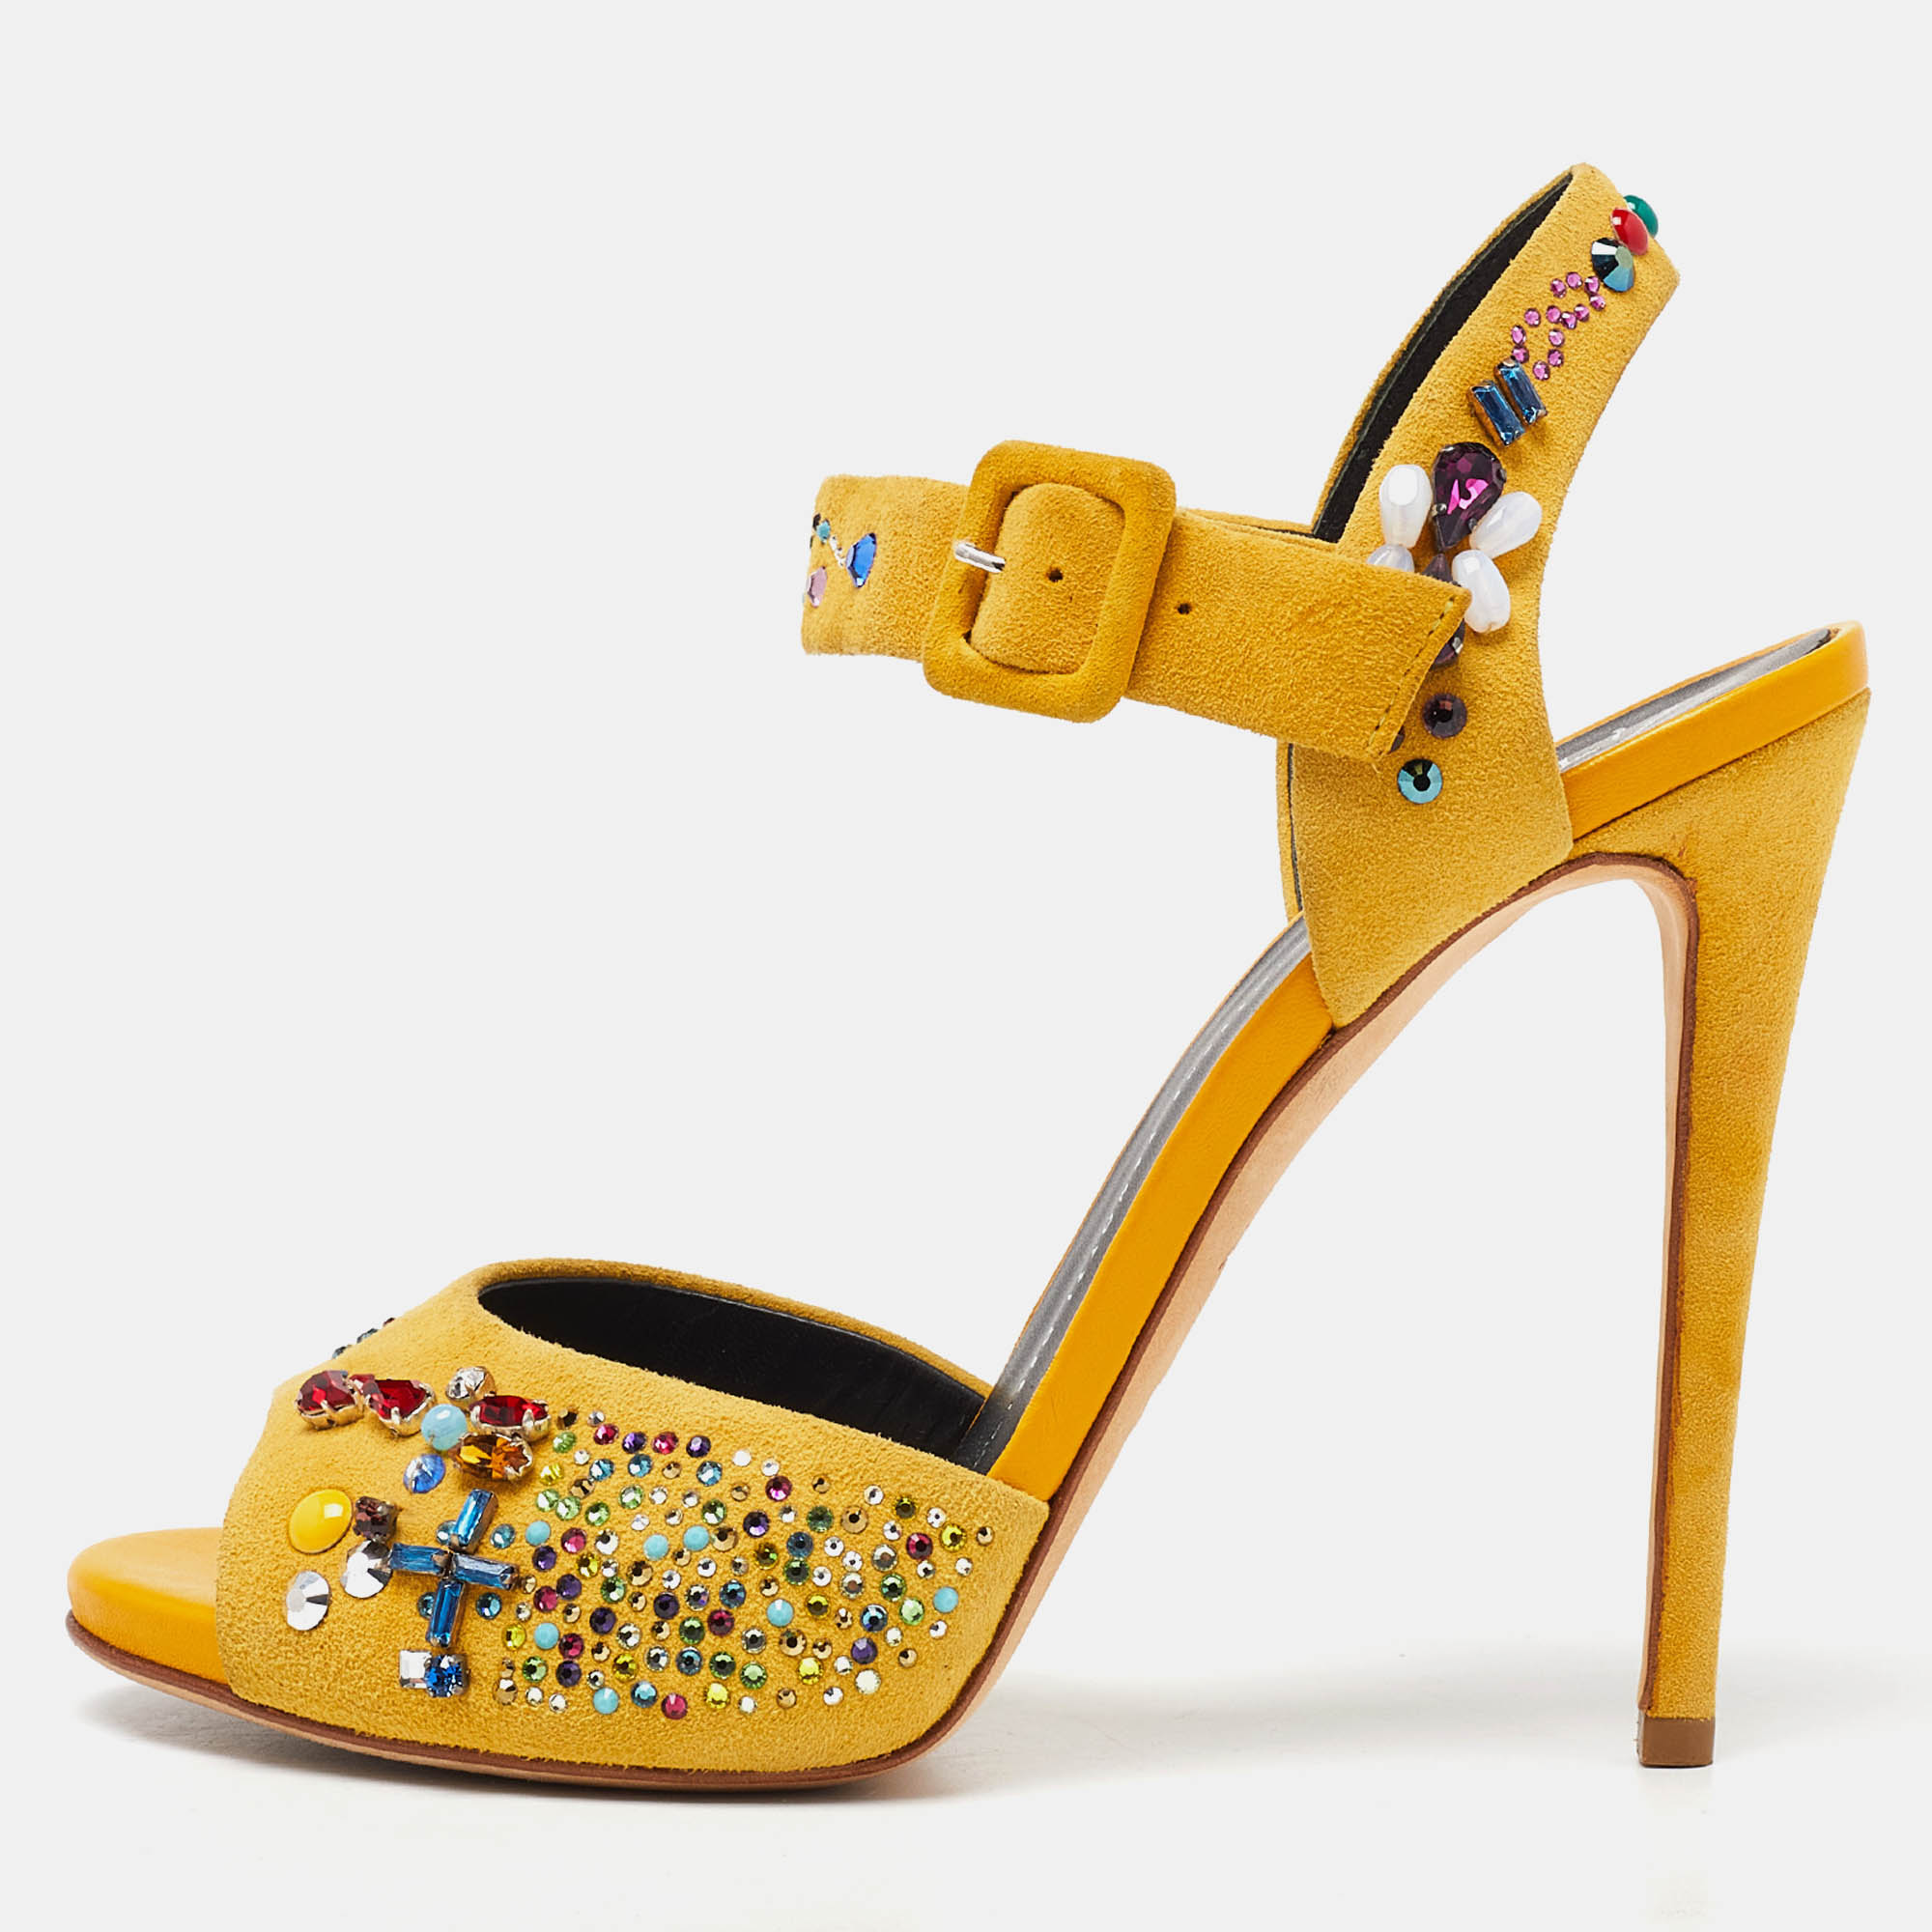 Giuseppe zanotti yellow suede crystal embellished ankle strap sandals size 38.5